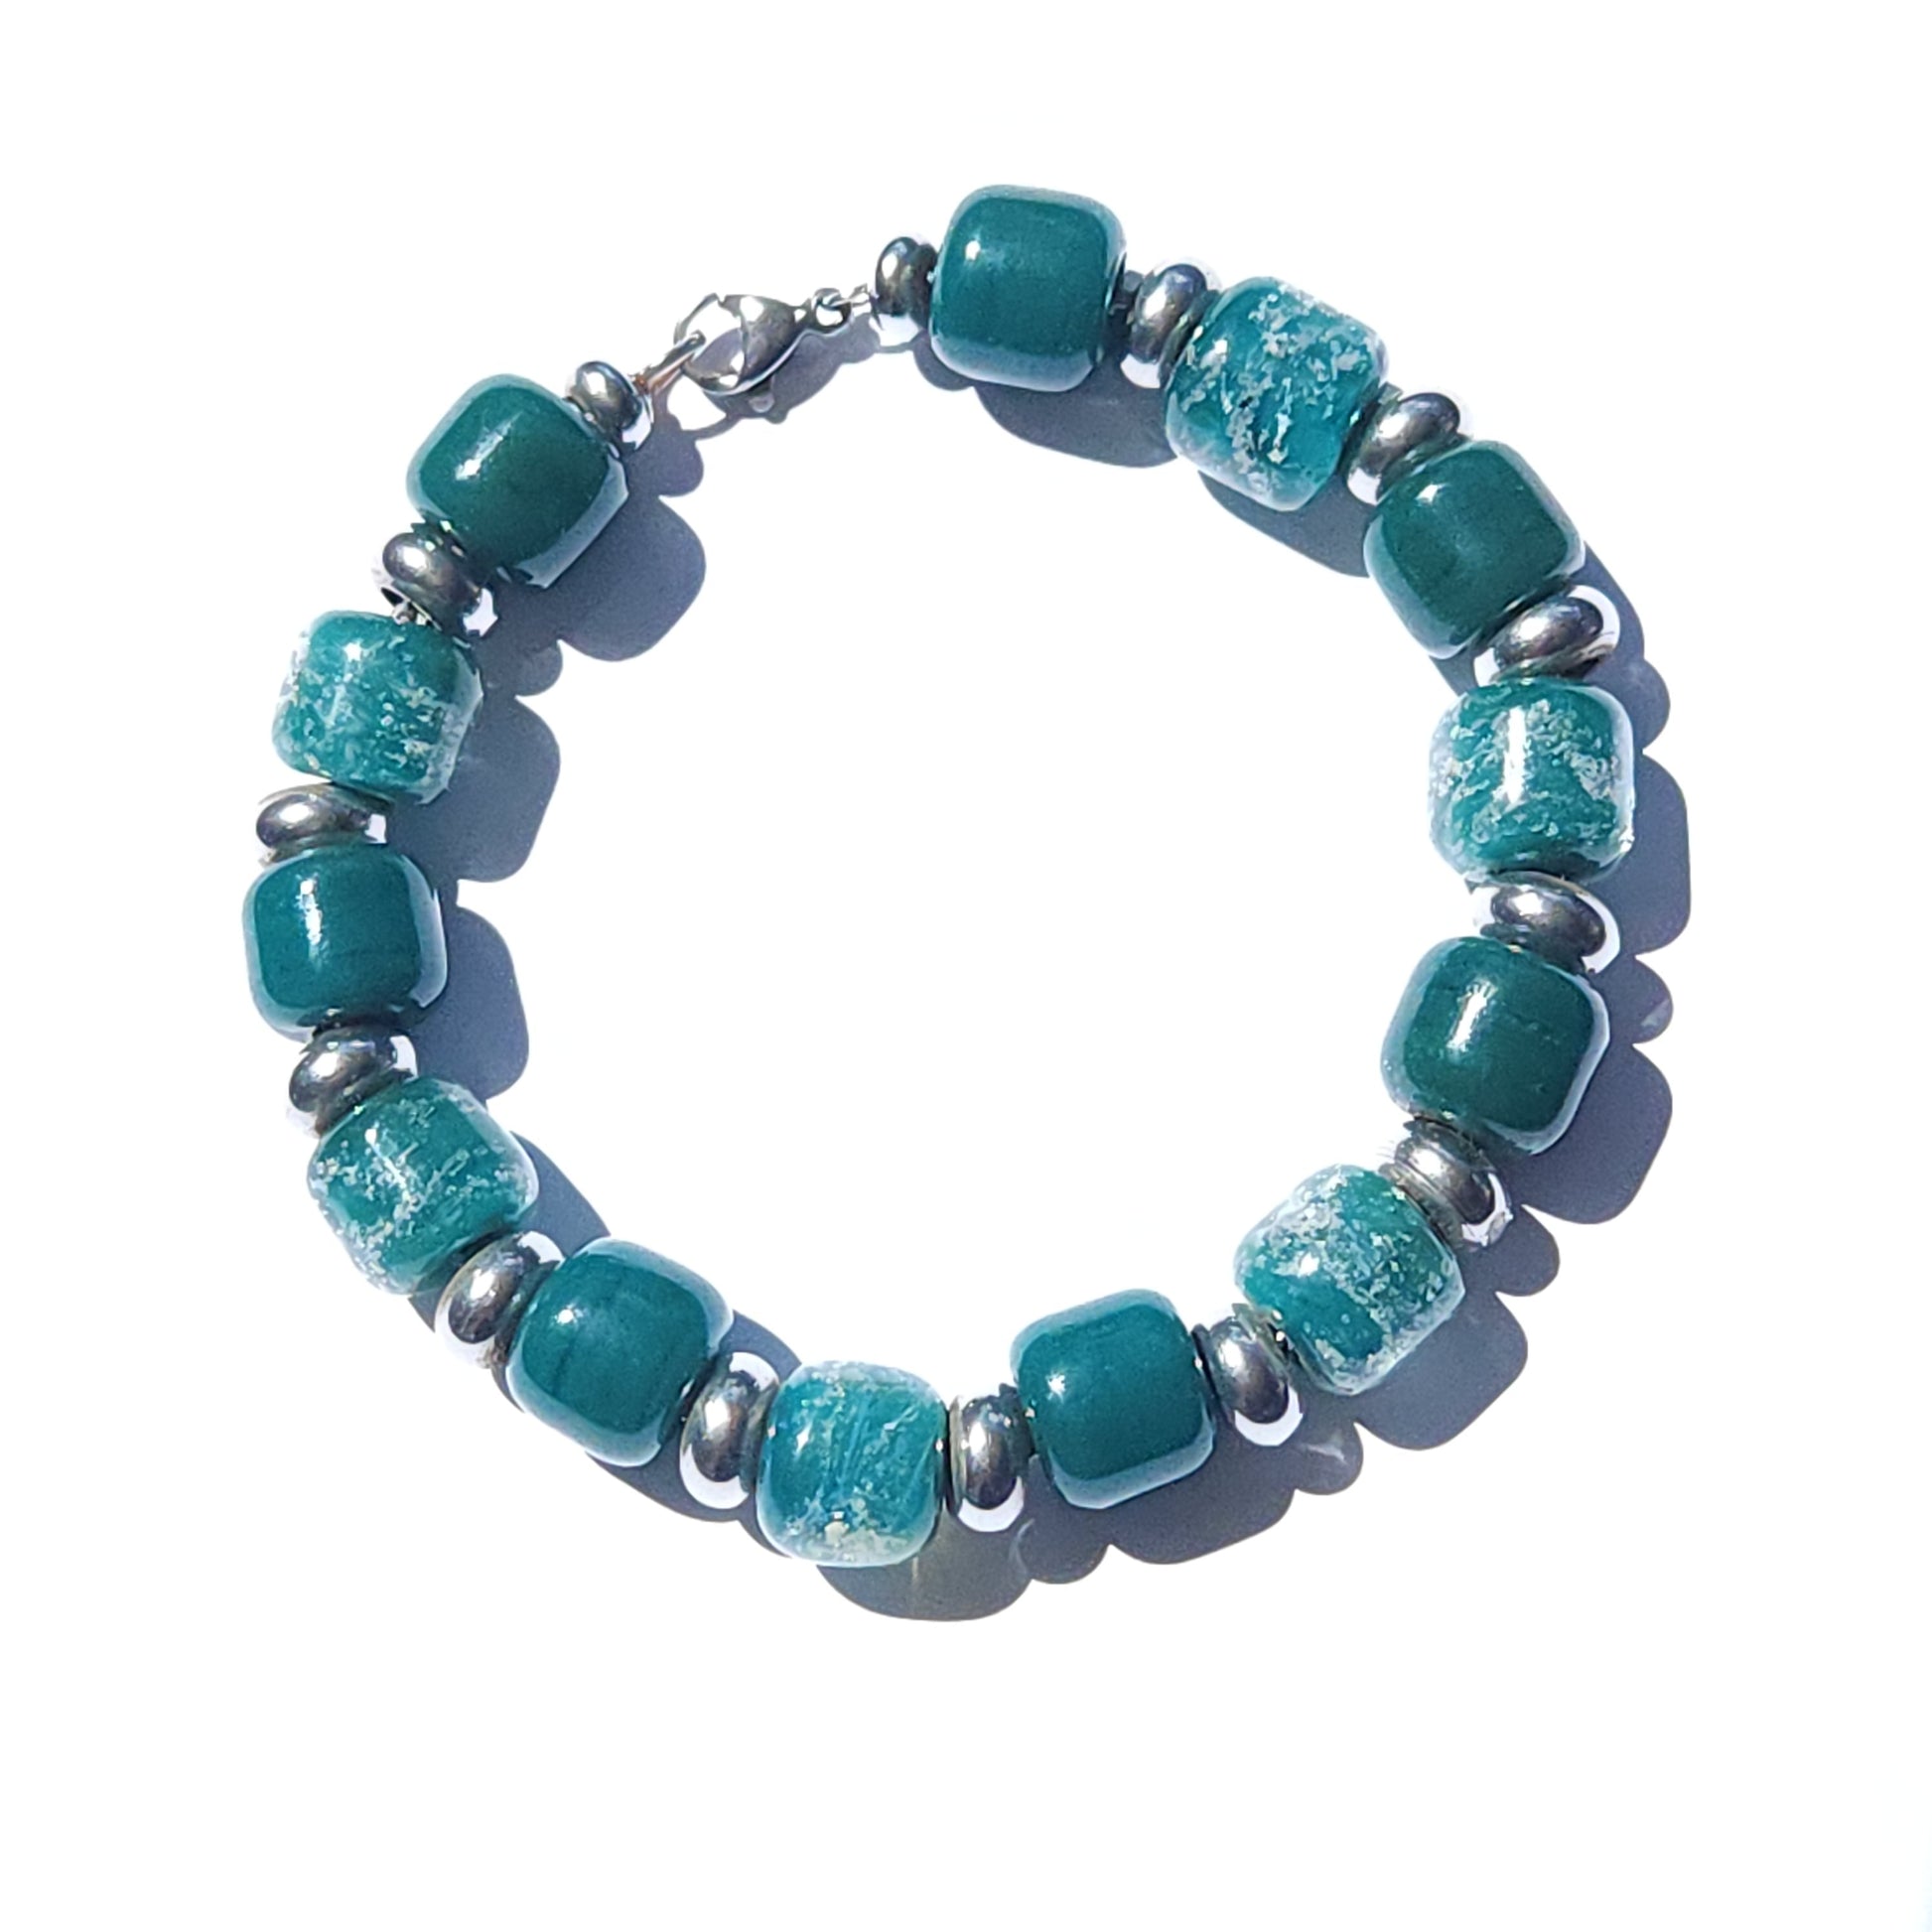 Eternal Cremation Bracelet With 6 Ash Beads - Silver-Cremation Beads-DragonFire Glass-Ocean Blue-DragonFire Glass Cremation Jewelry